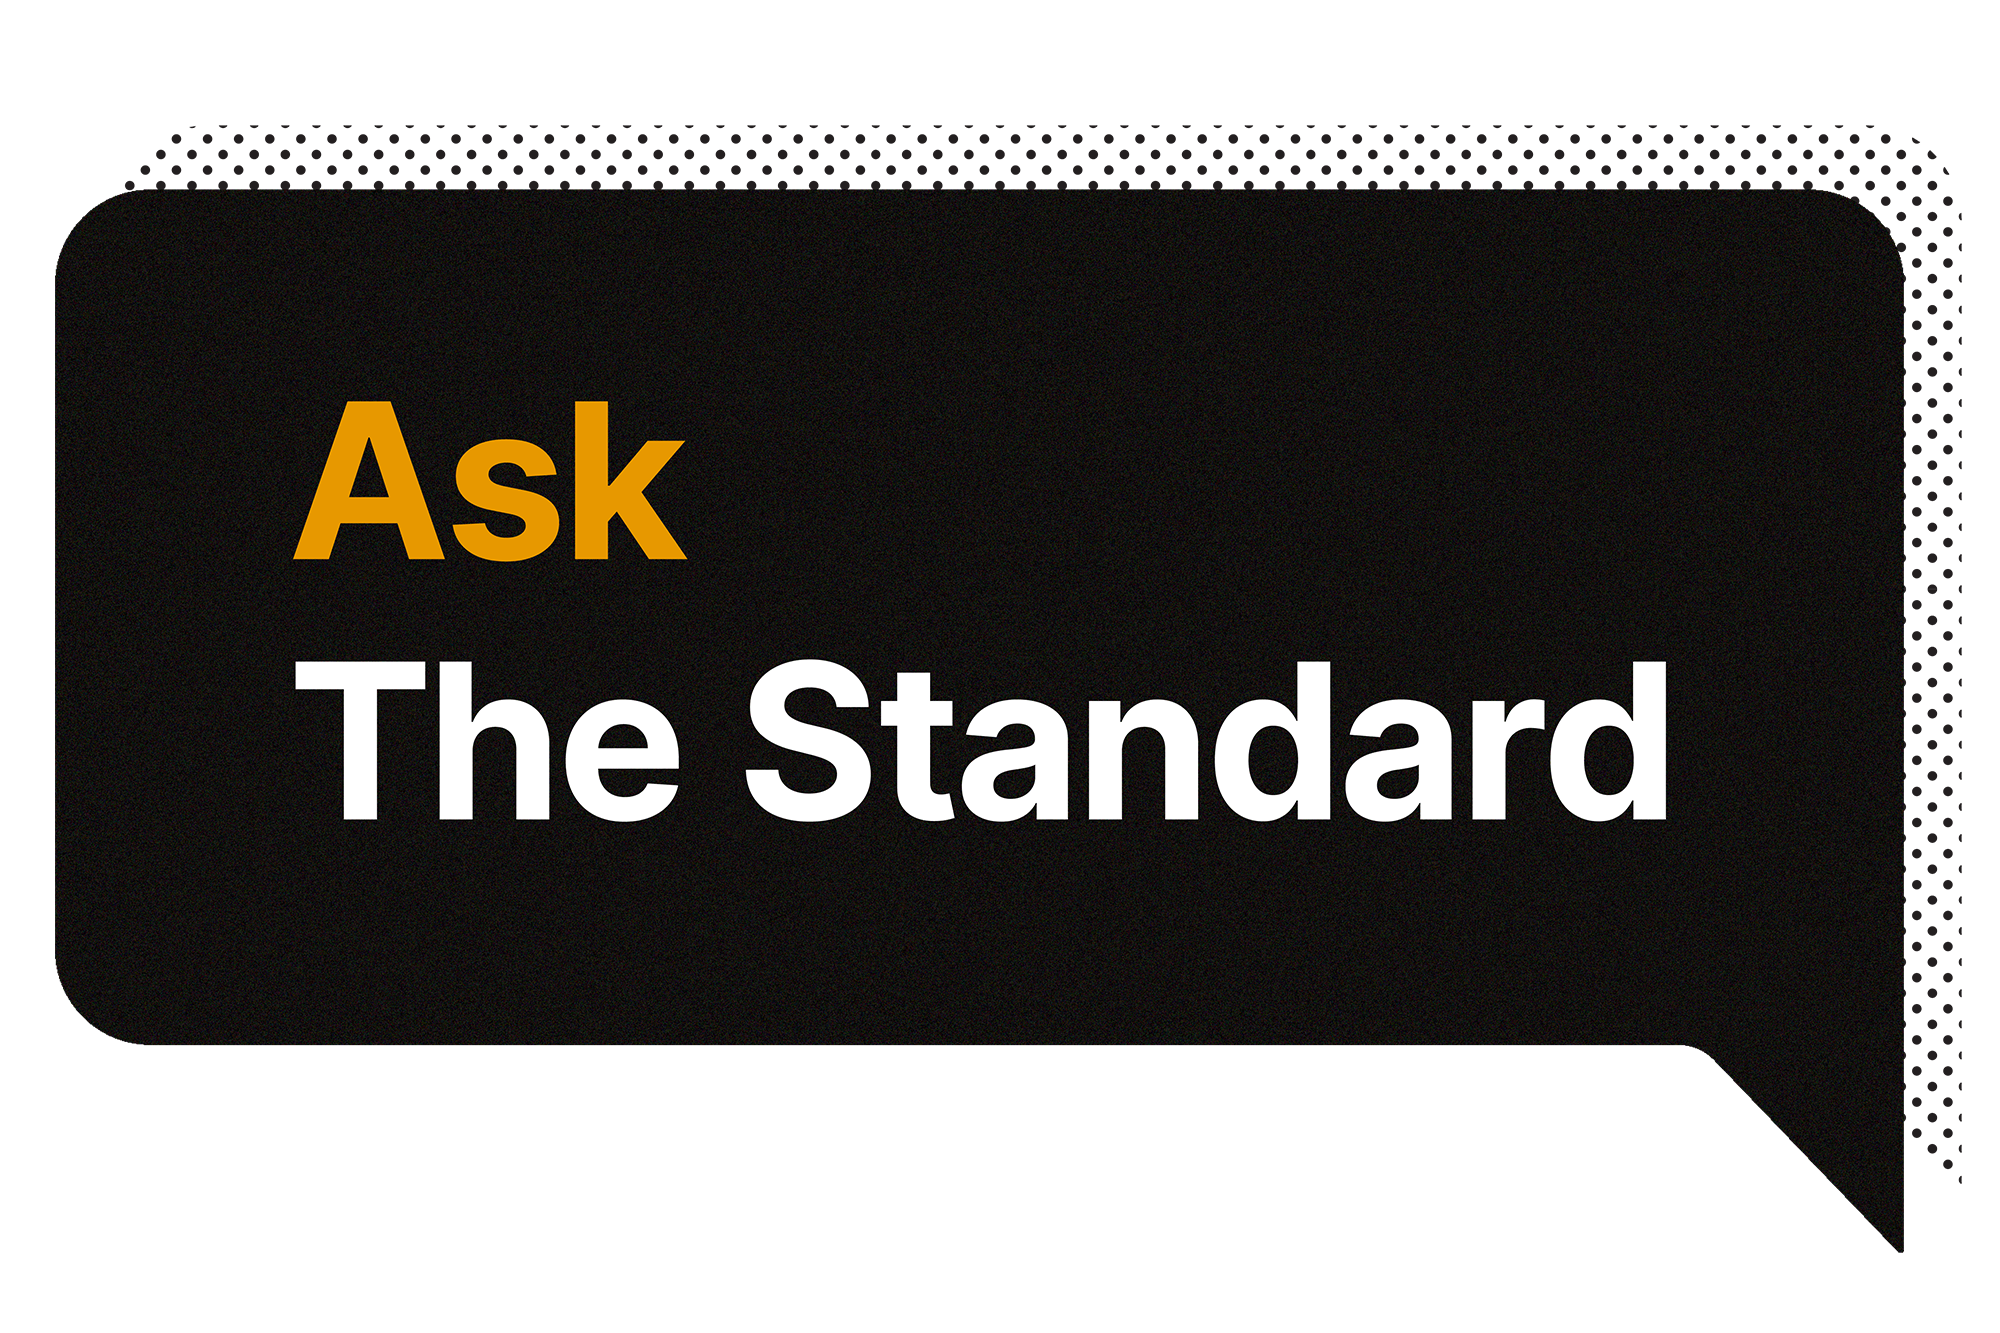 A stylized graphic with the phrase "Ask the Standard" in the shape of a text box.